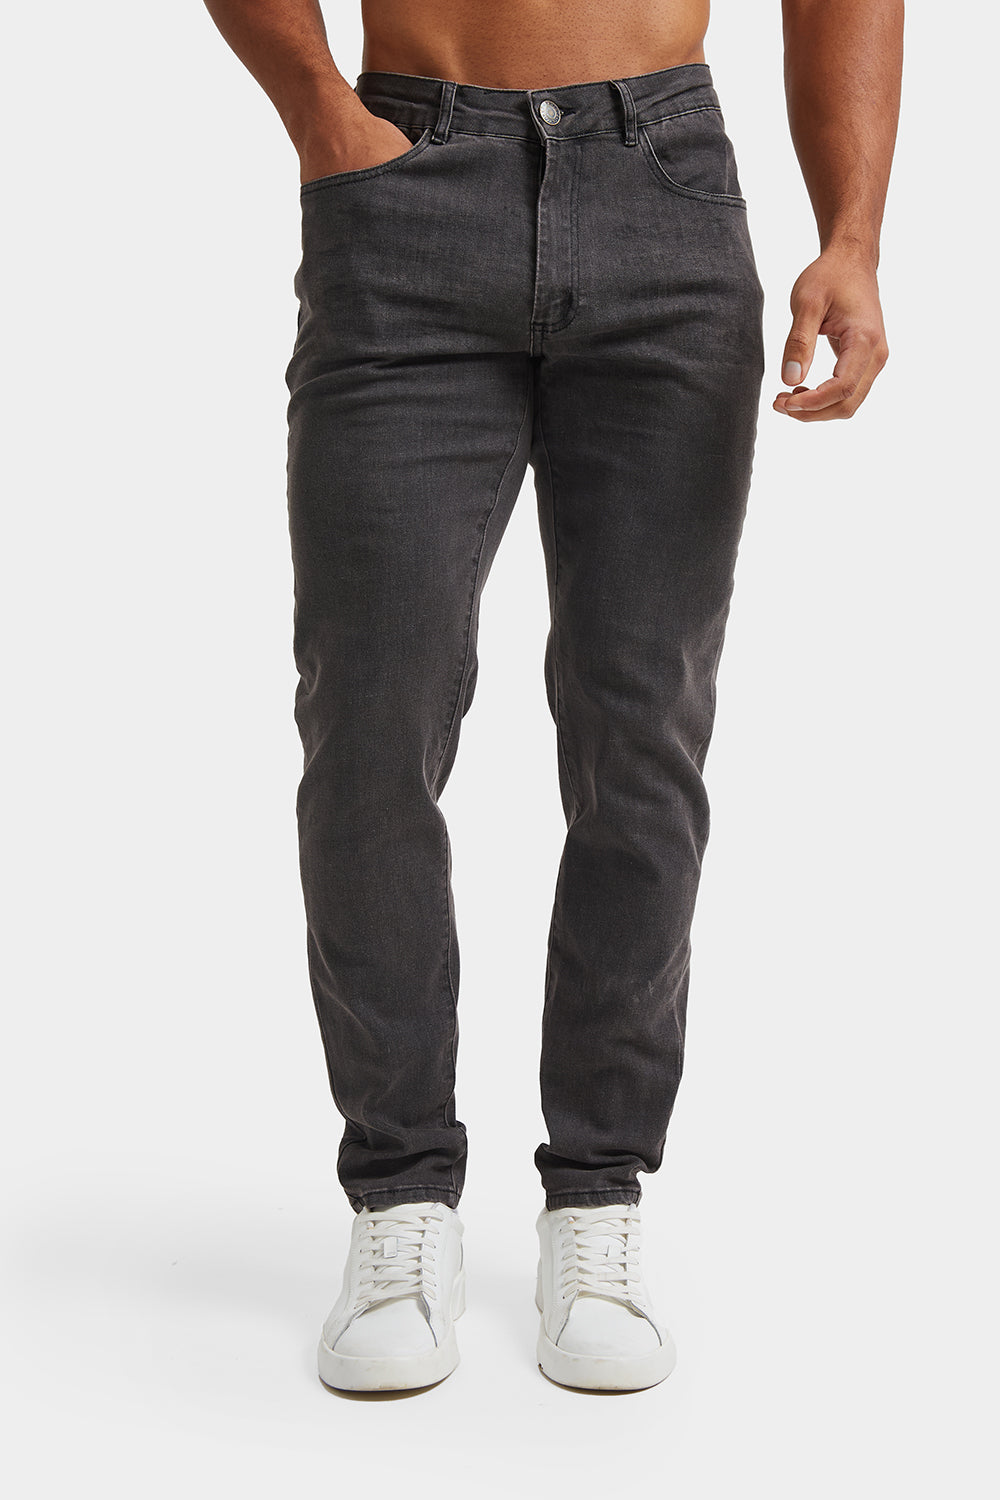 Buy Grey Jeans for Men by Being Human Online | Ajio.com